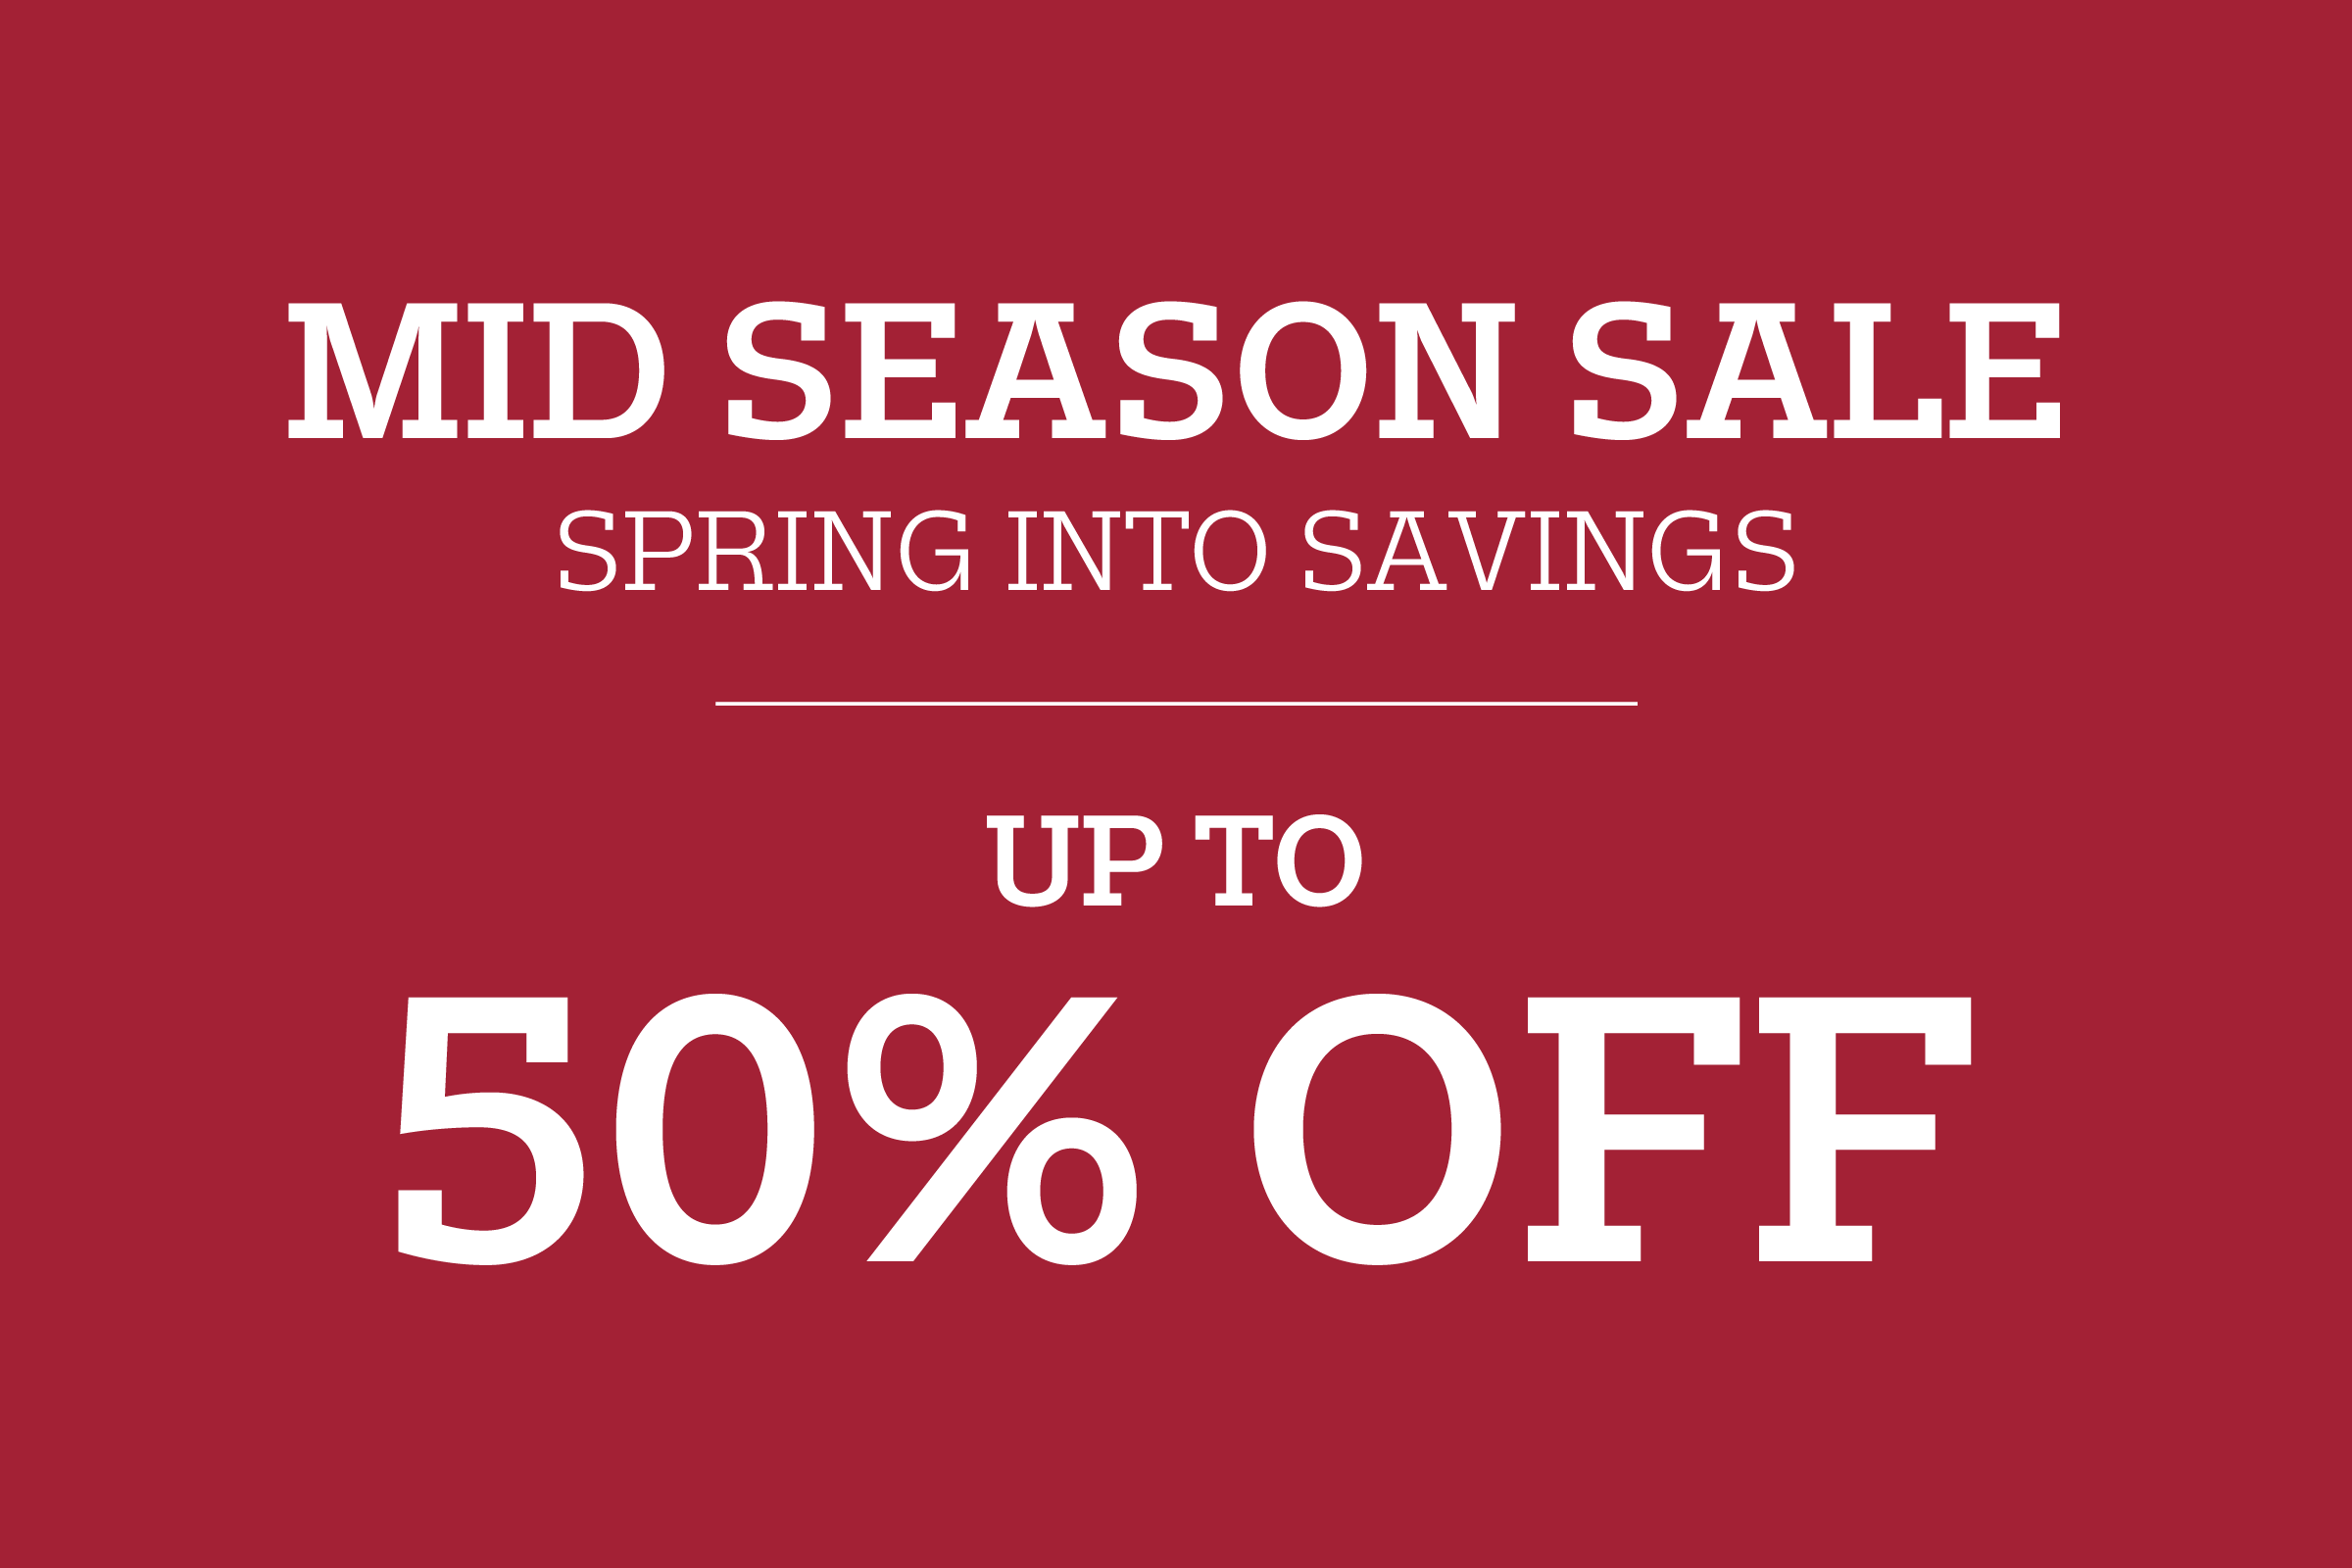 MID-SEASON SALE UP TO 50% OFF